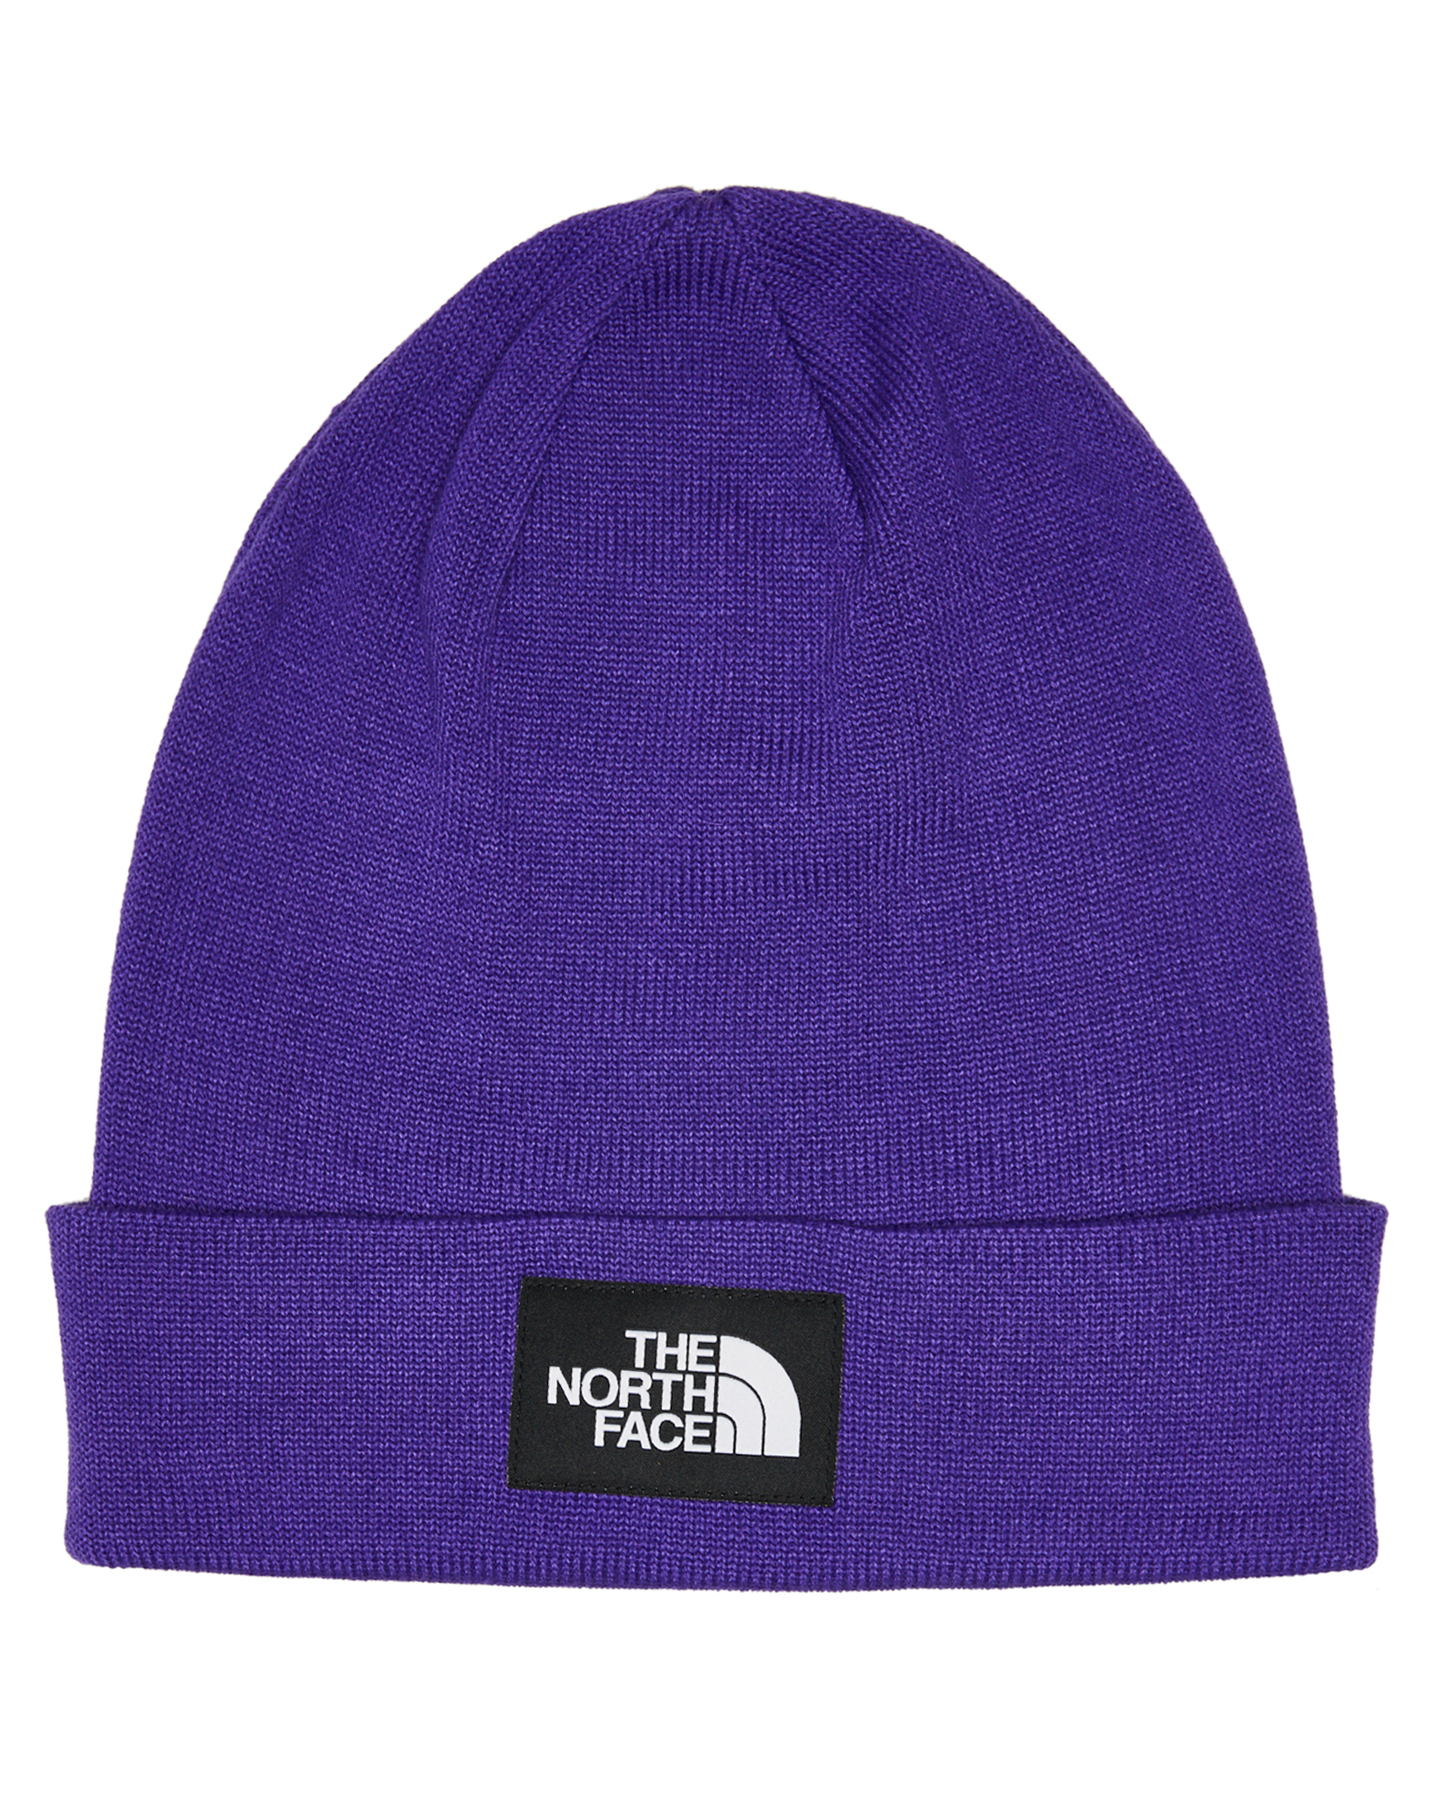 The North Face Dock Worker Recycled Beanie - Hero Purple Black | SurfStitch